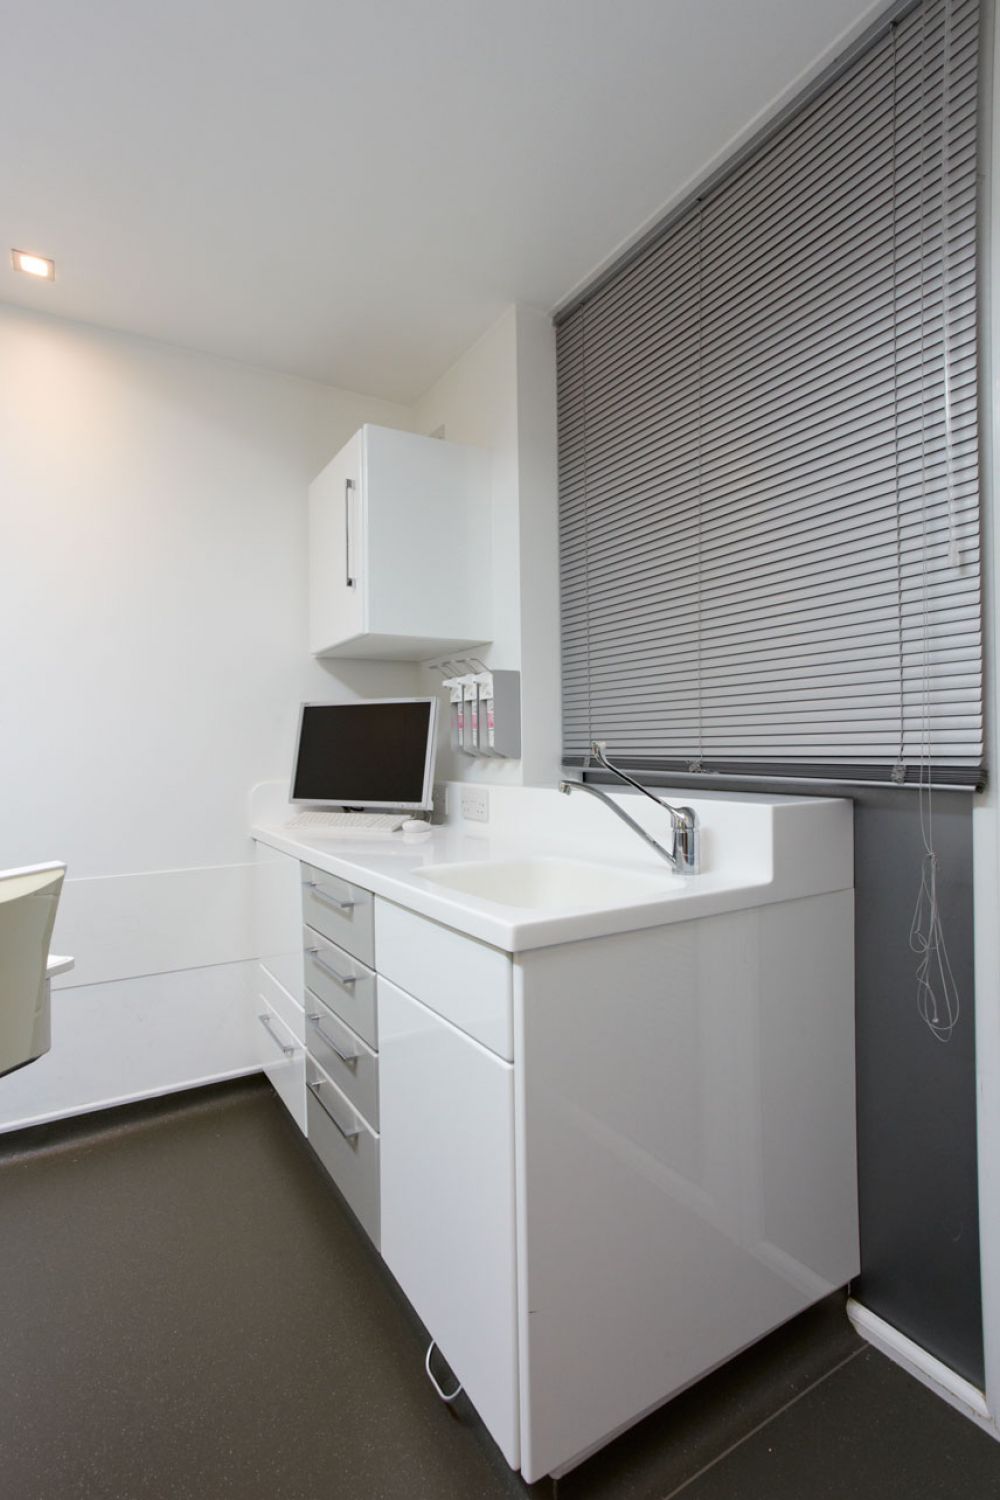 Dental Cabinetry